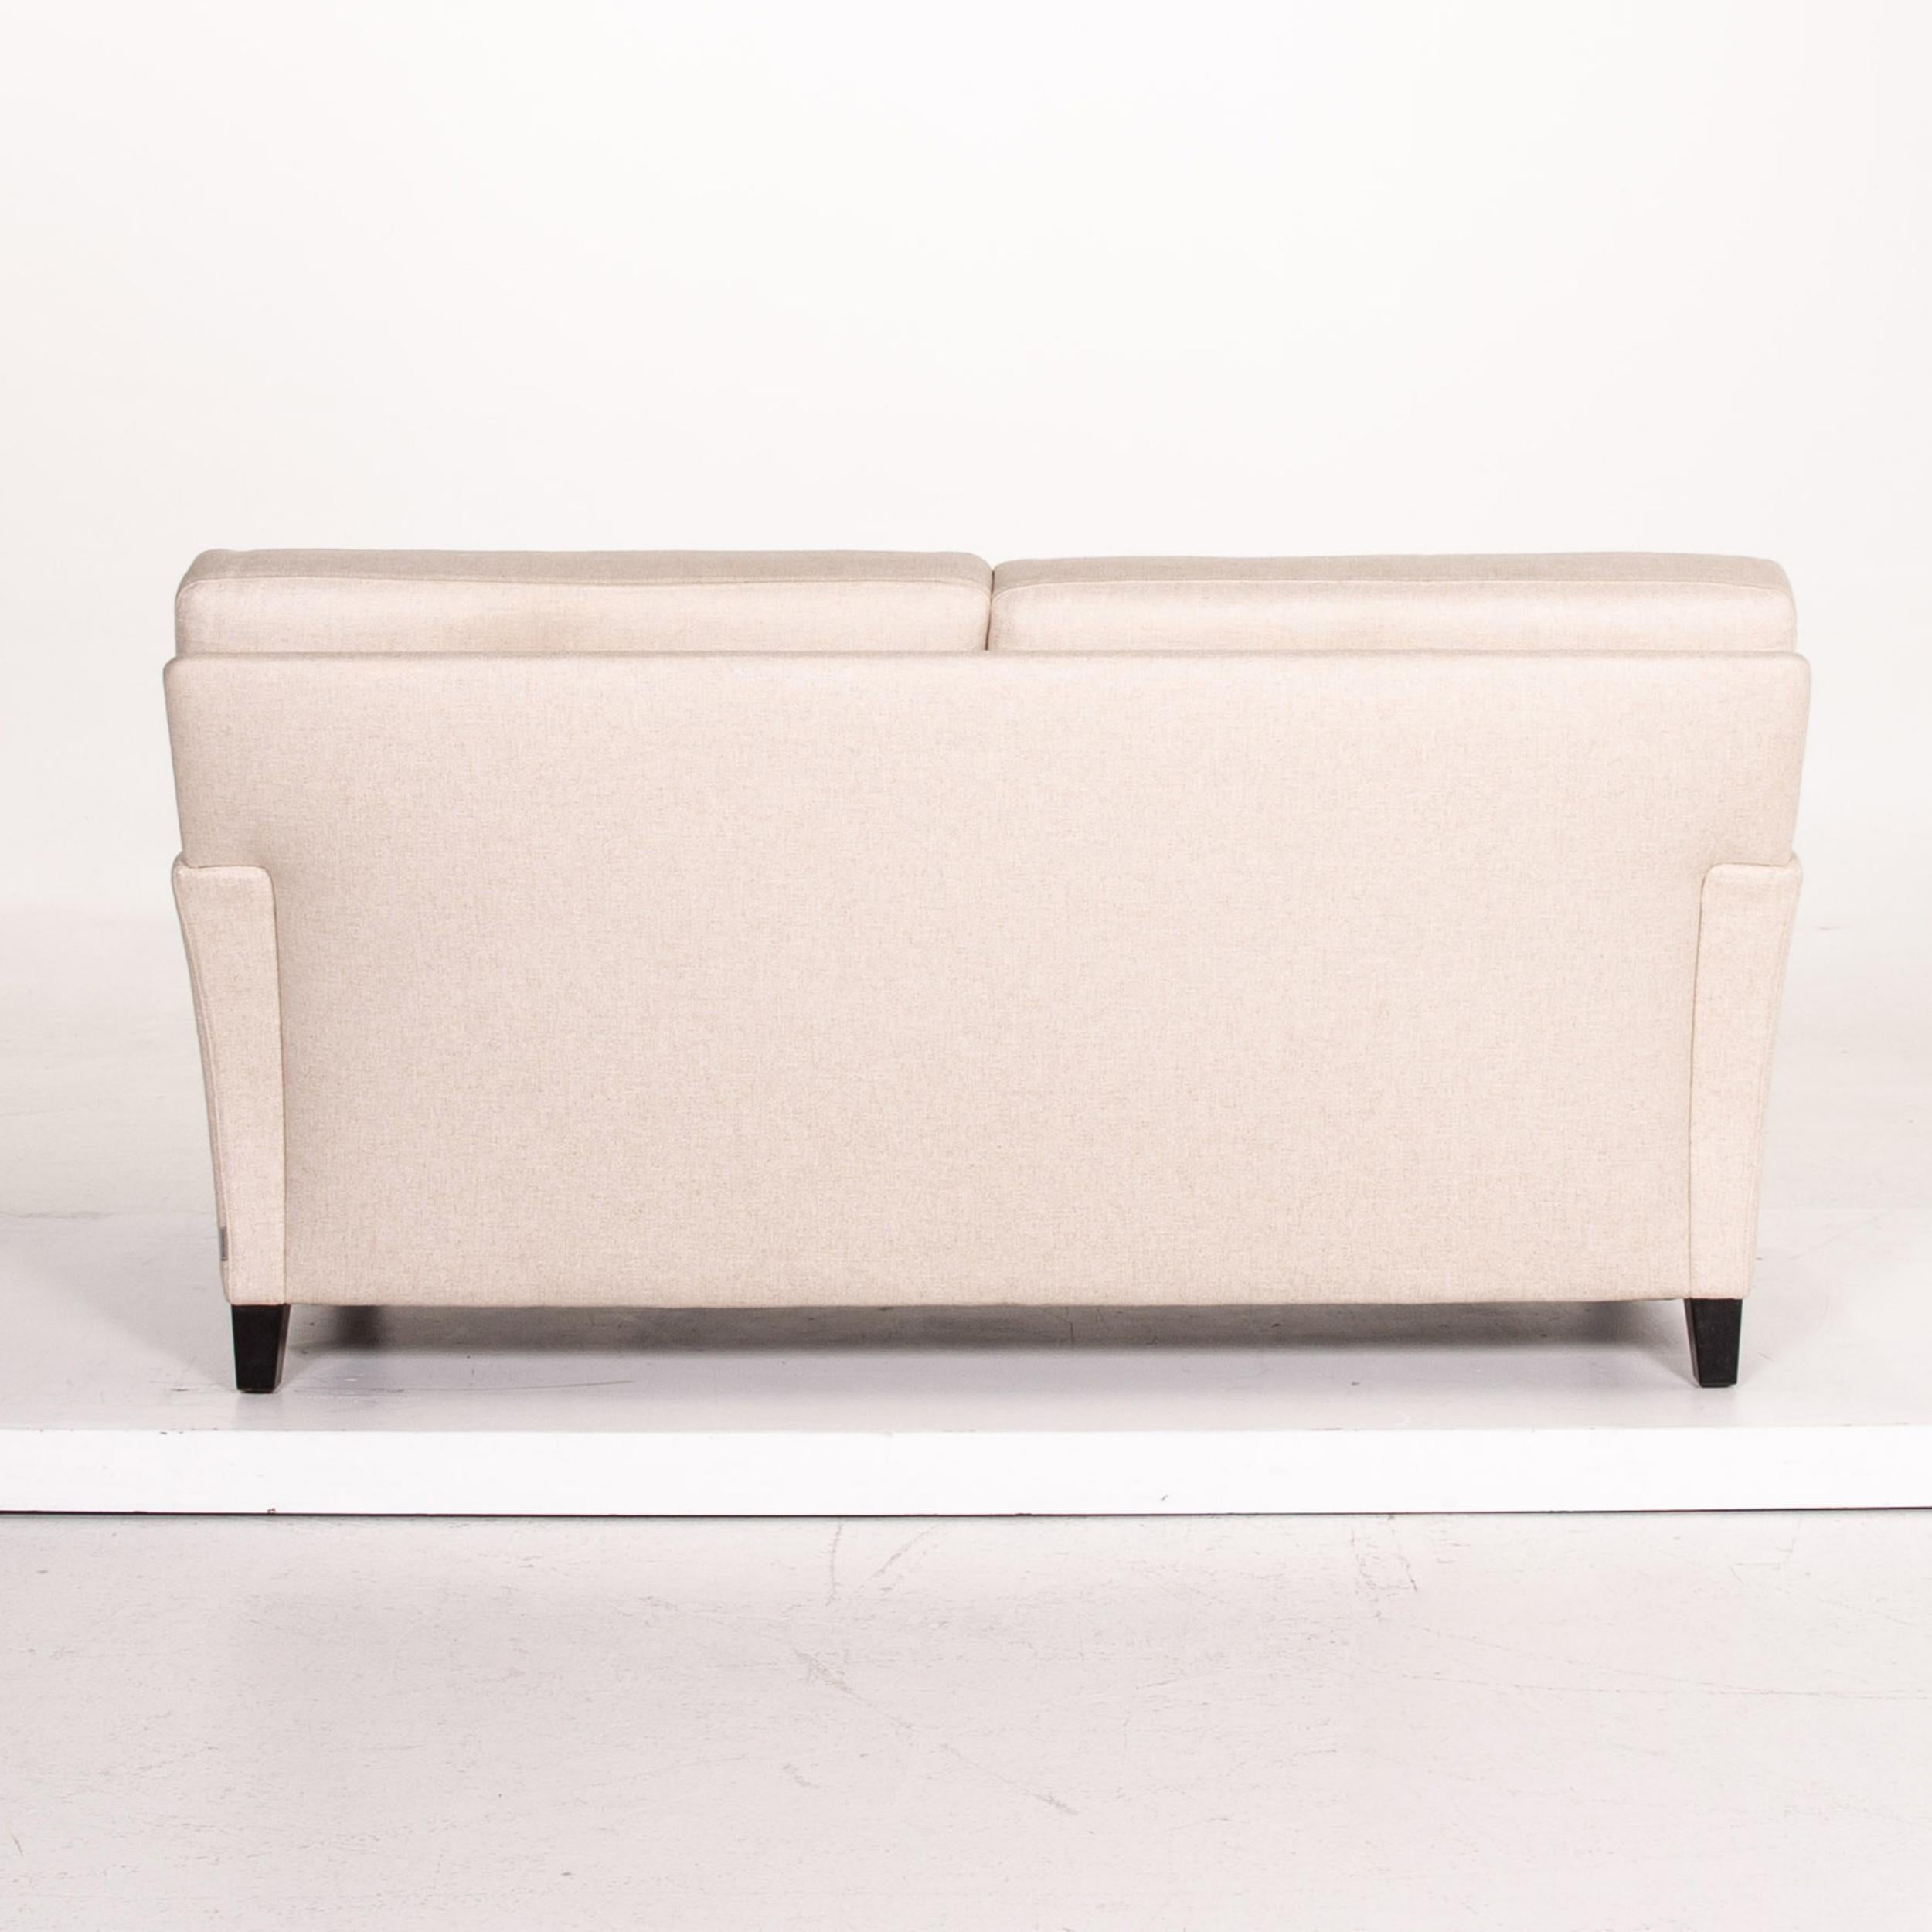 Walter Knoll Henry Fabric Sofa Cream Two-Seat Couch 4